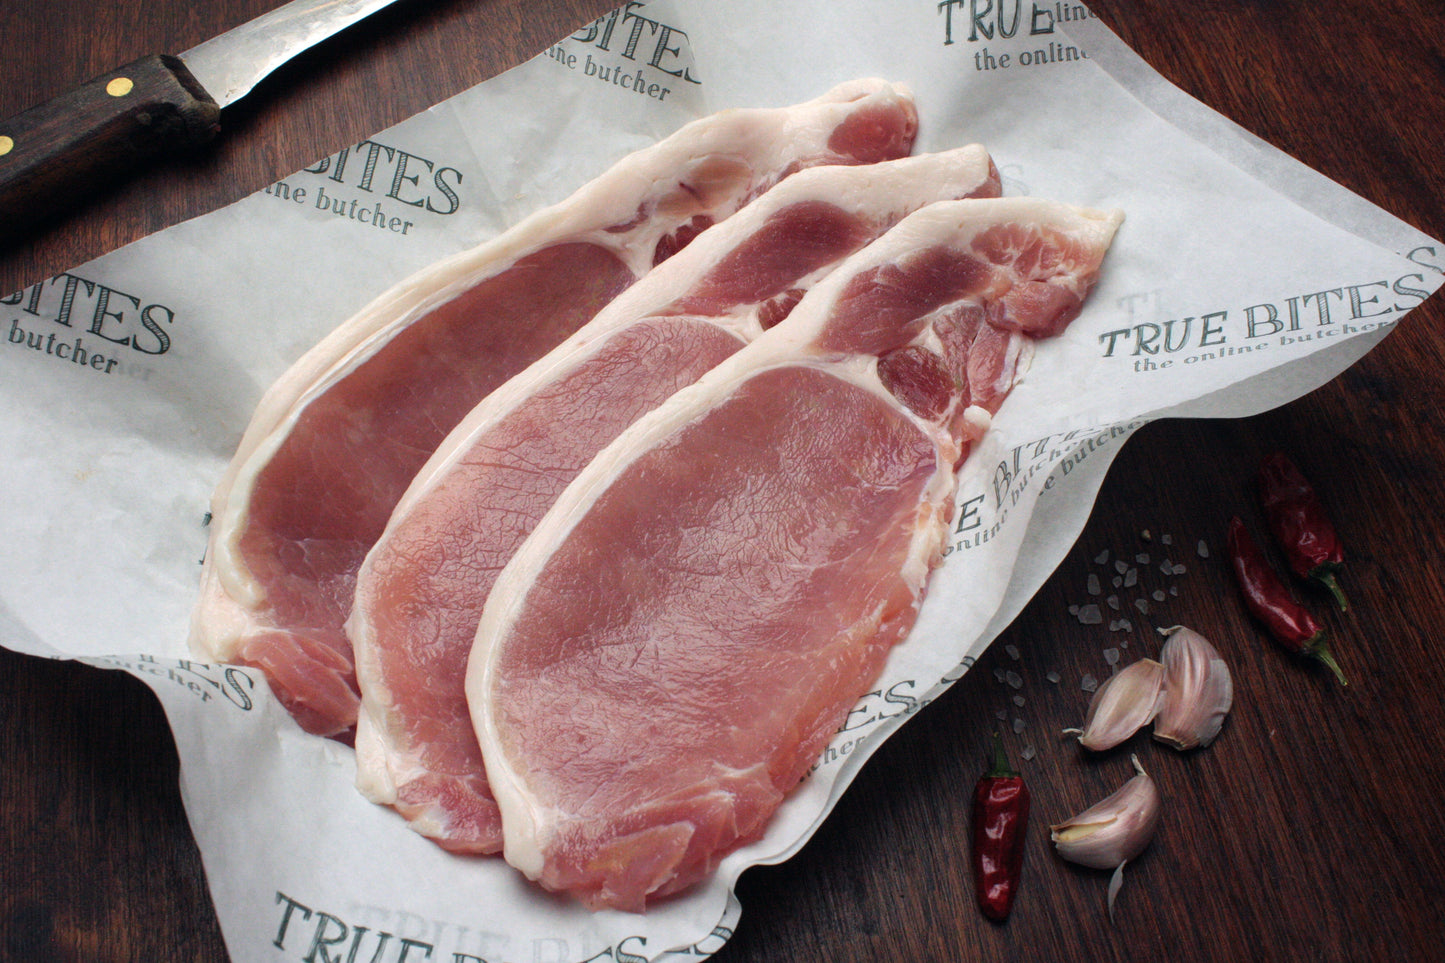 rashers of back bacon displayed on true bites branded greaseproof paper